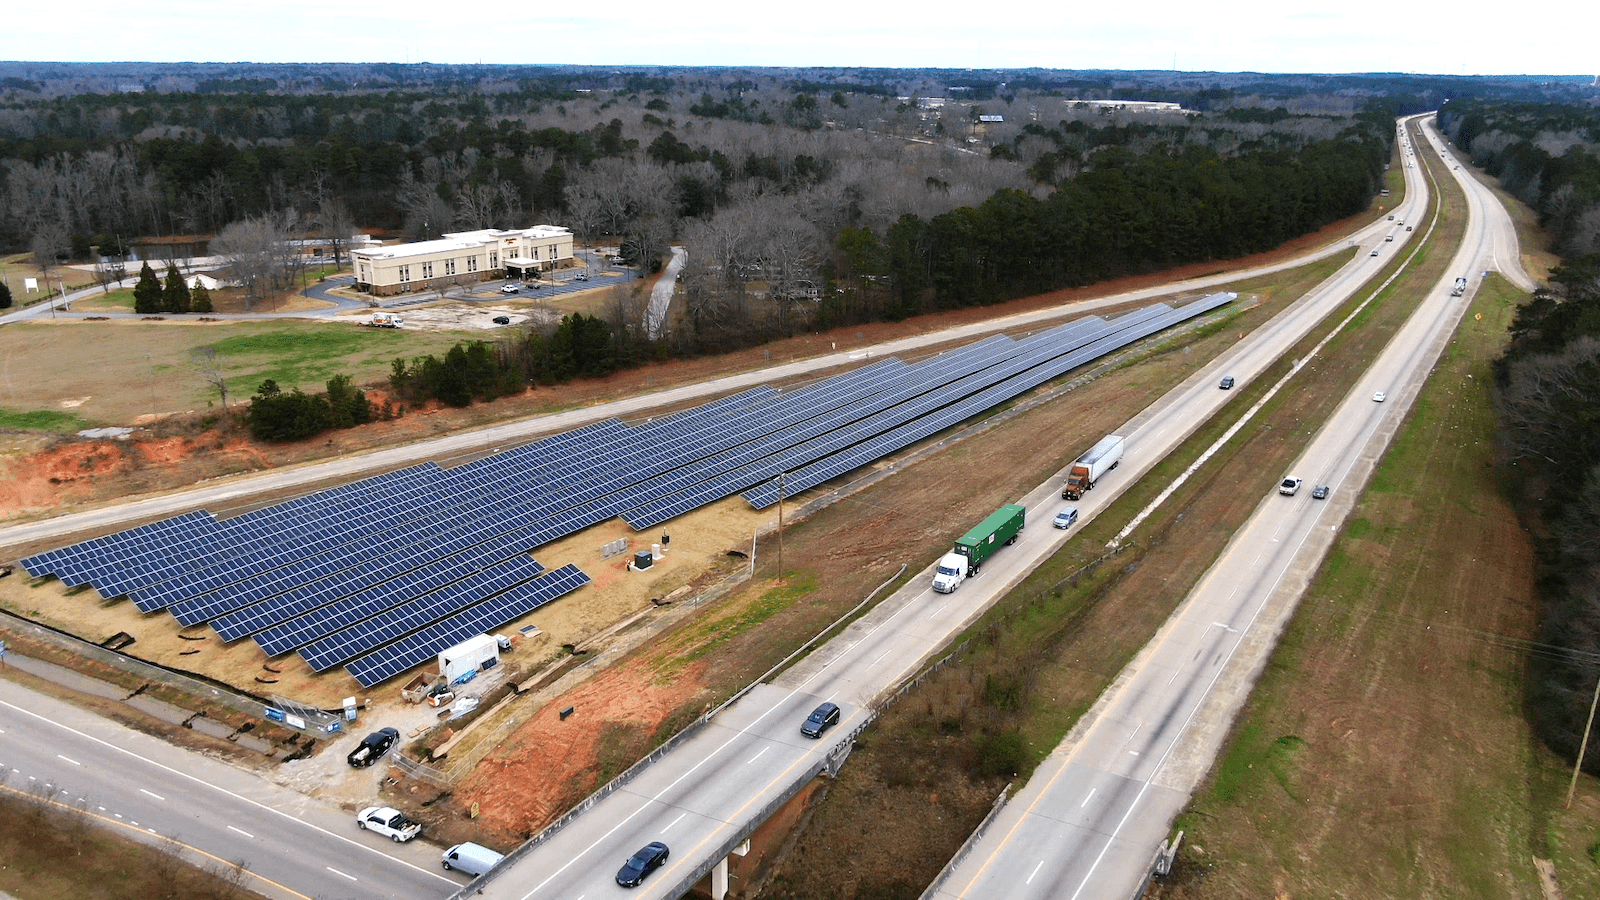 a road splits into two sections. In between in the grassy area a large many-rowed array of solar panels